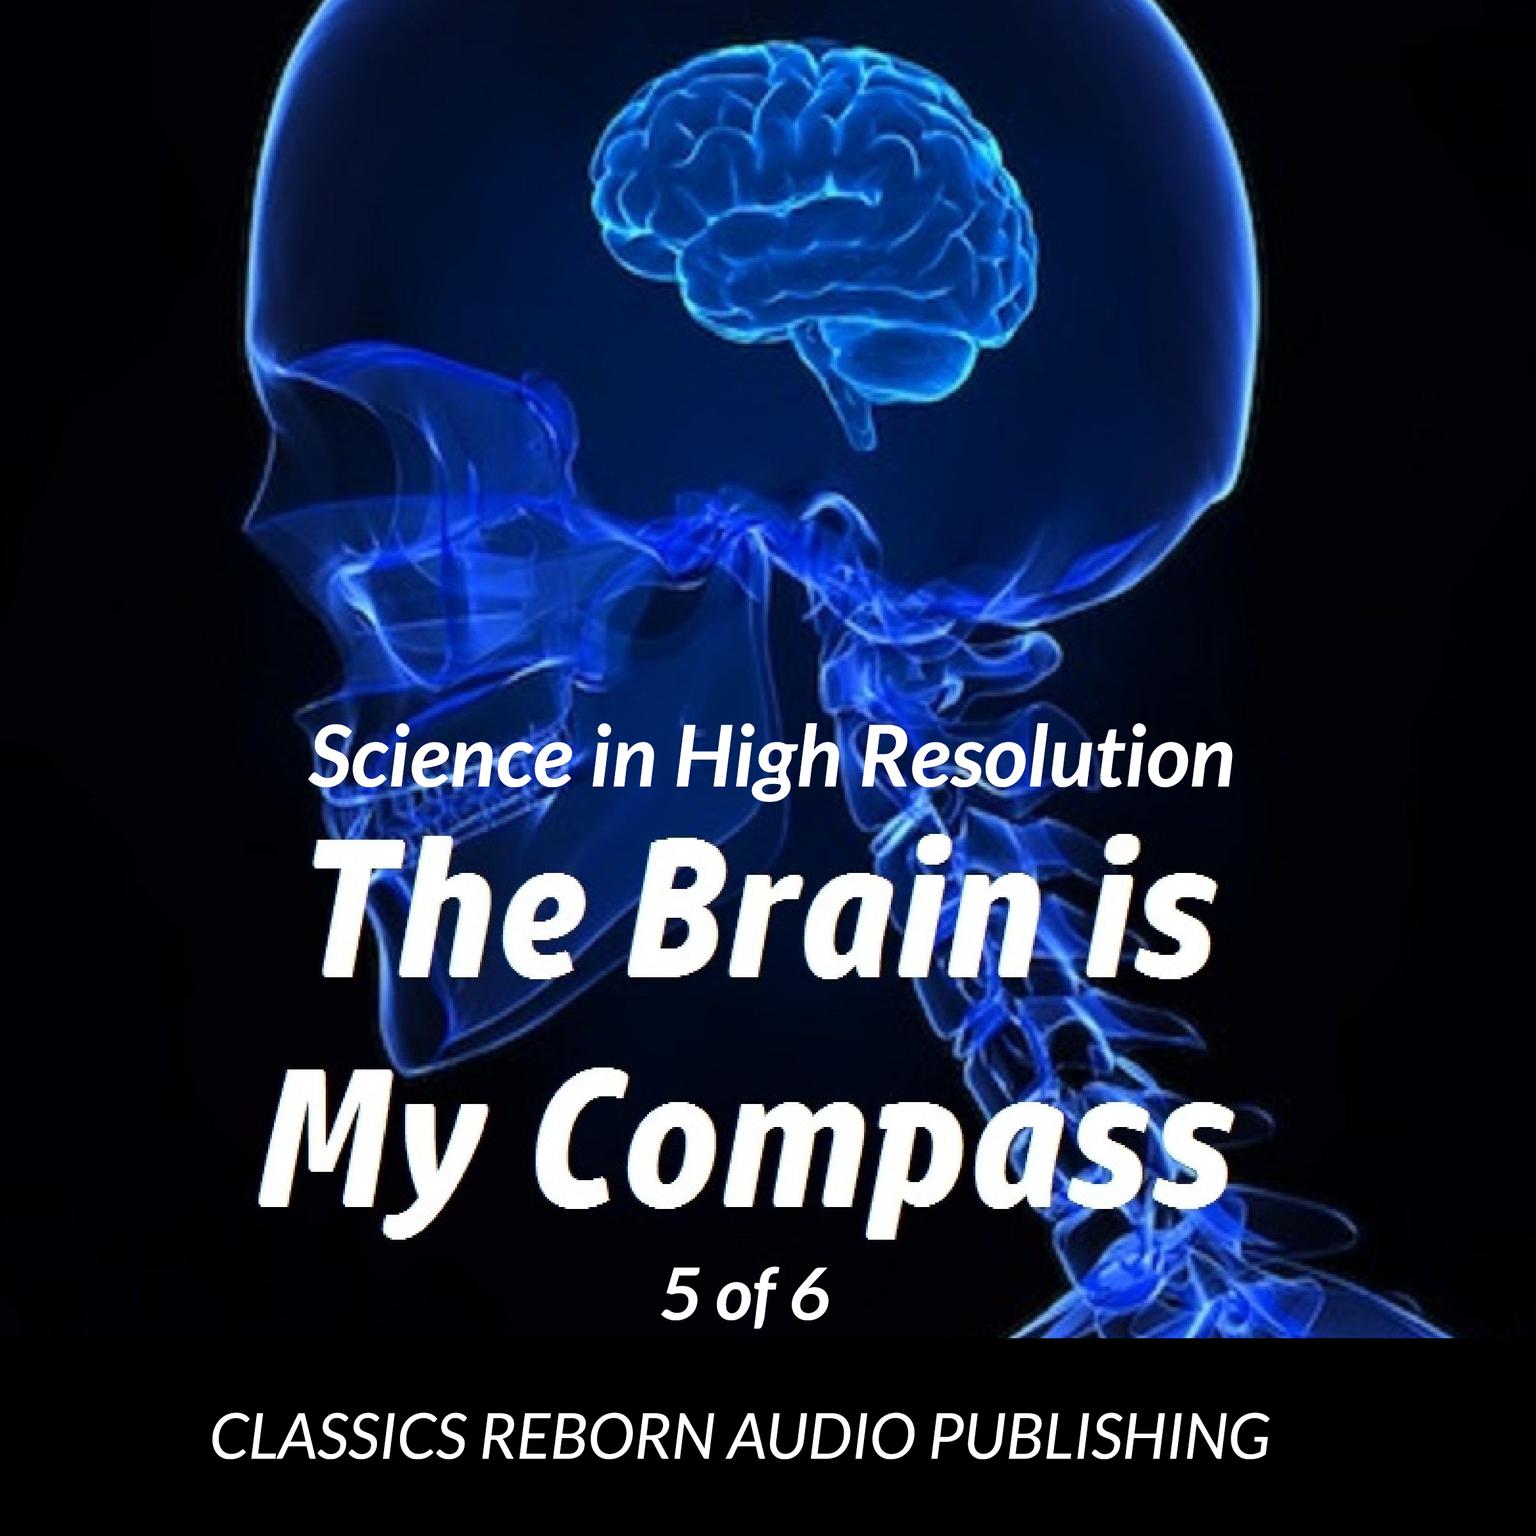 Science in High Resolution 5 of 6 The Brain Is My Compass [Navigation] (lecture) Audiobook, by Classics Reborn Audio Publishing